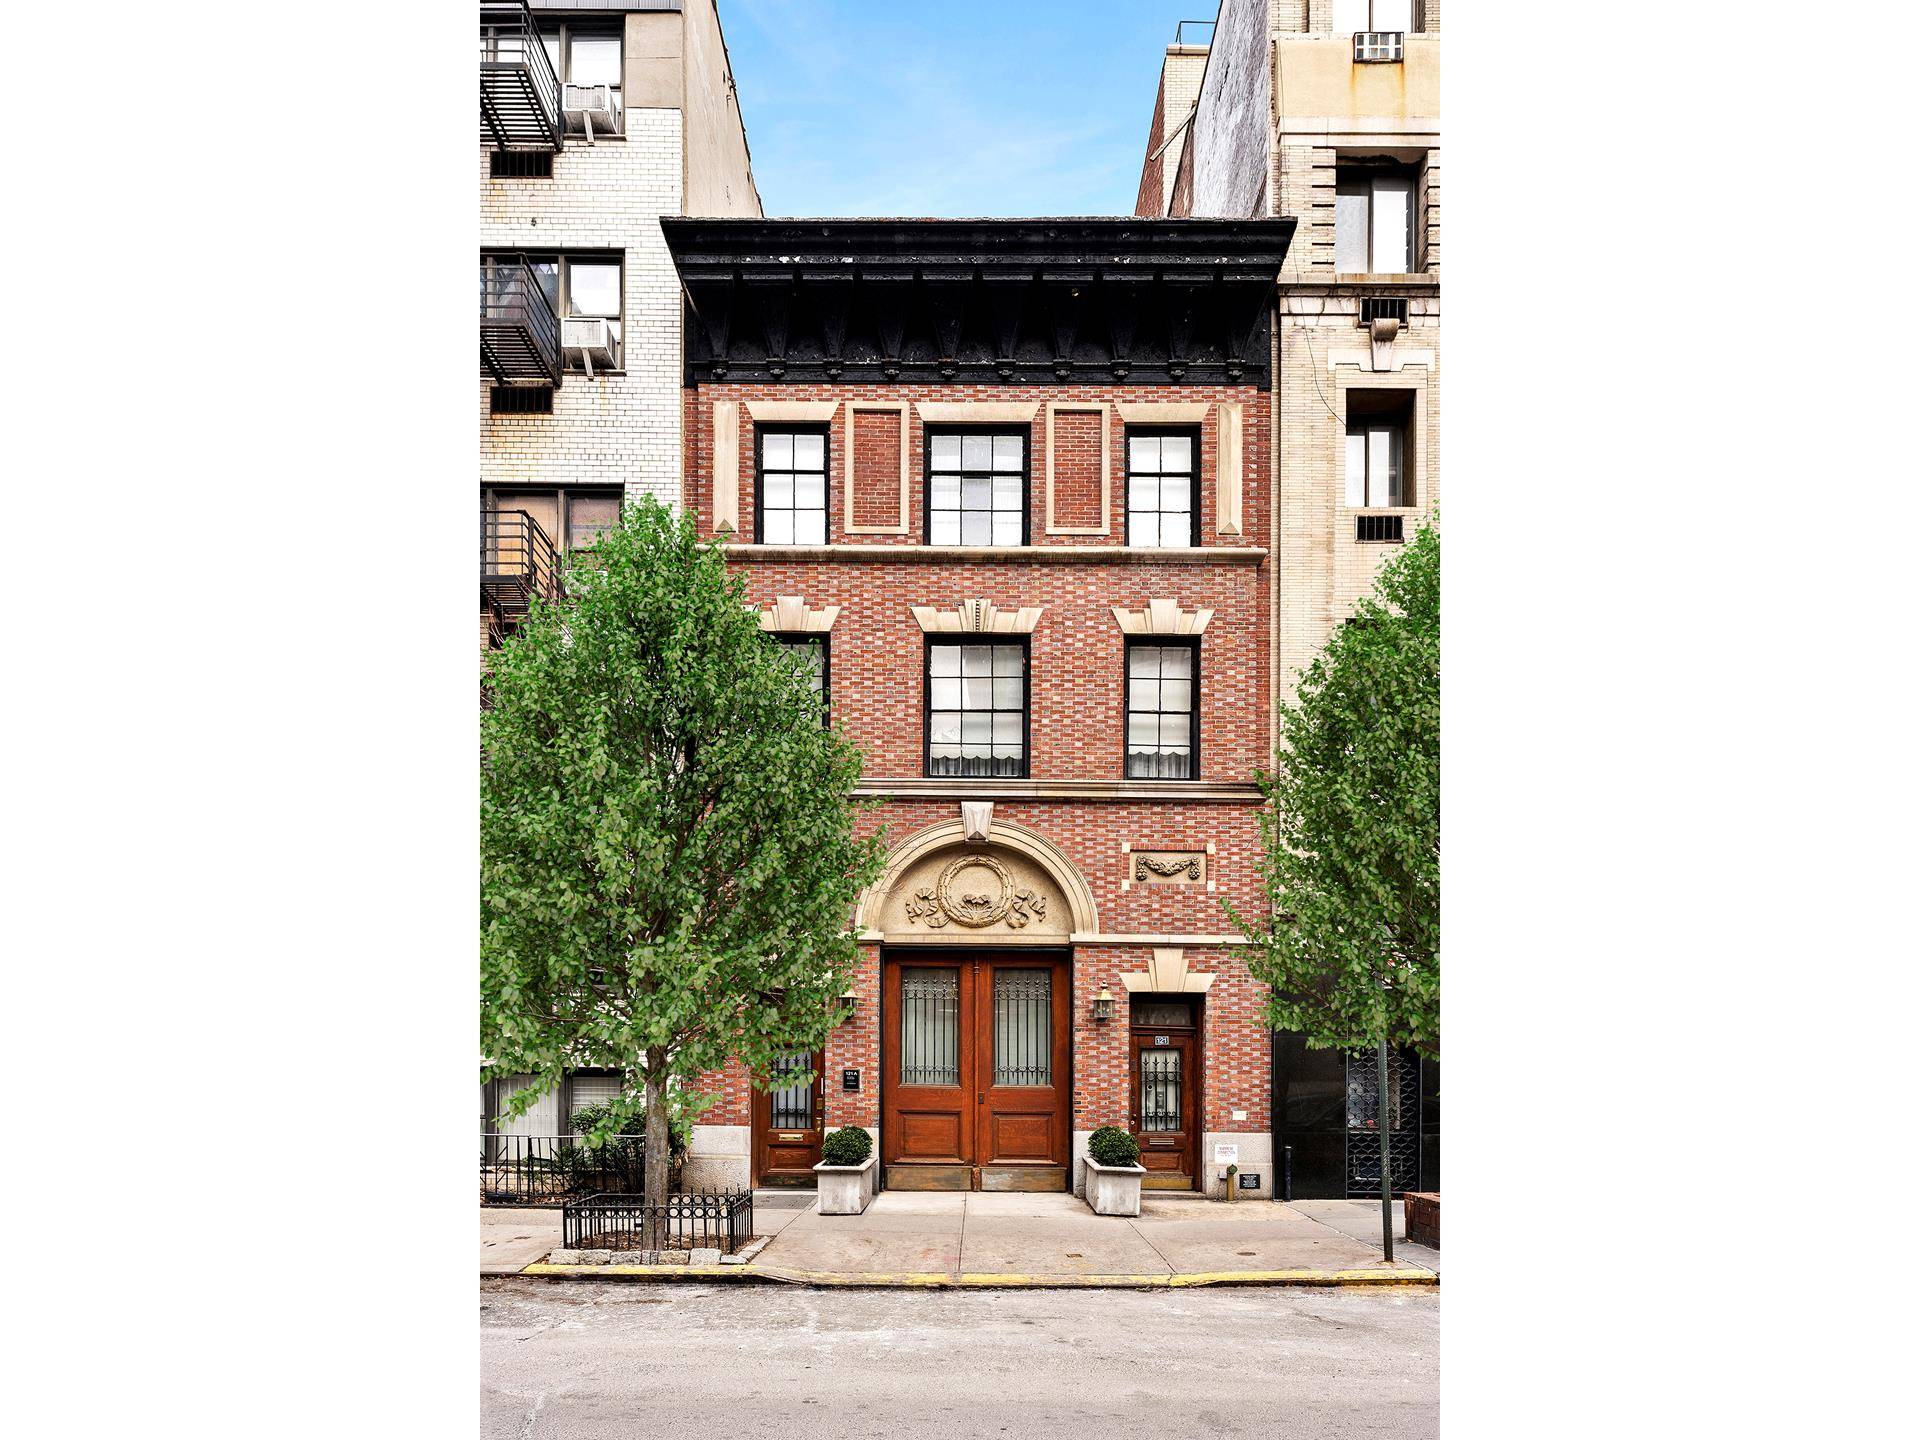 Presenting a rare opportunity to own, renovate and customize a history rich Carriage House on Manhattan's prestigious Upper East Side, with additional FAR to expand to 10, 420 square feet.